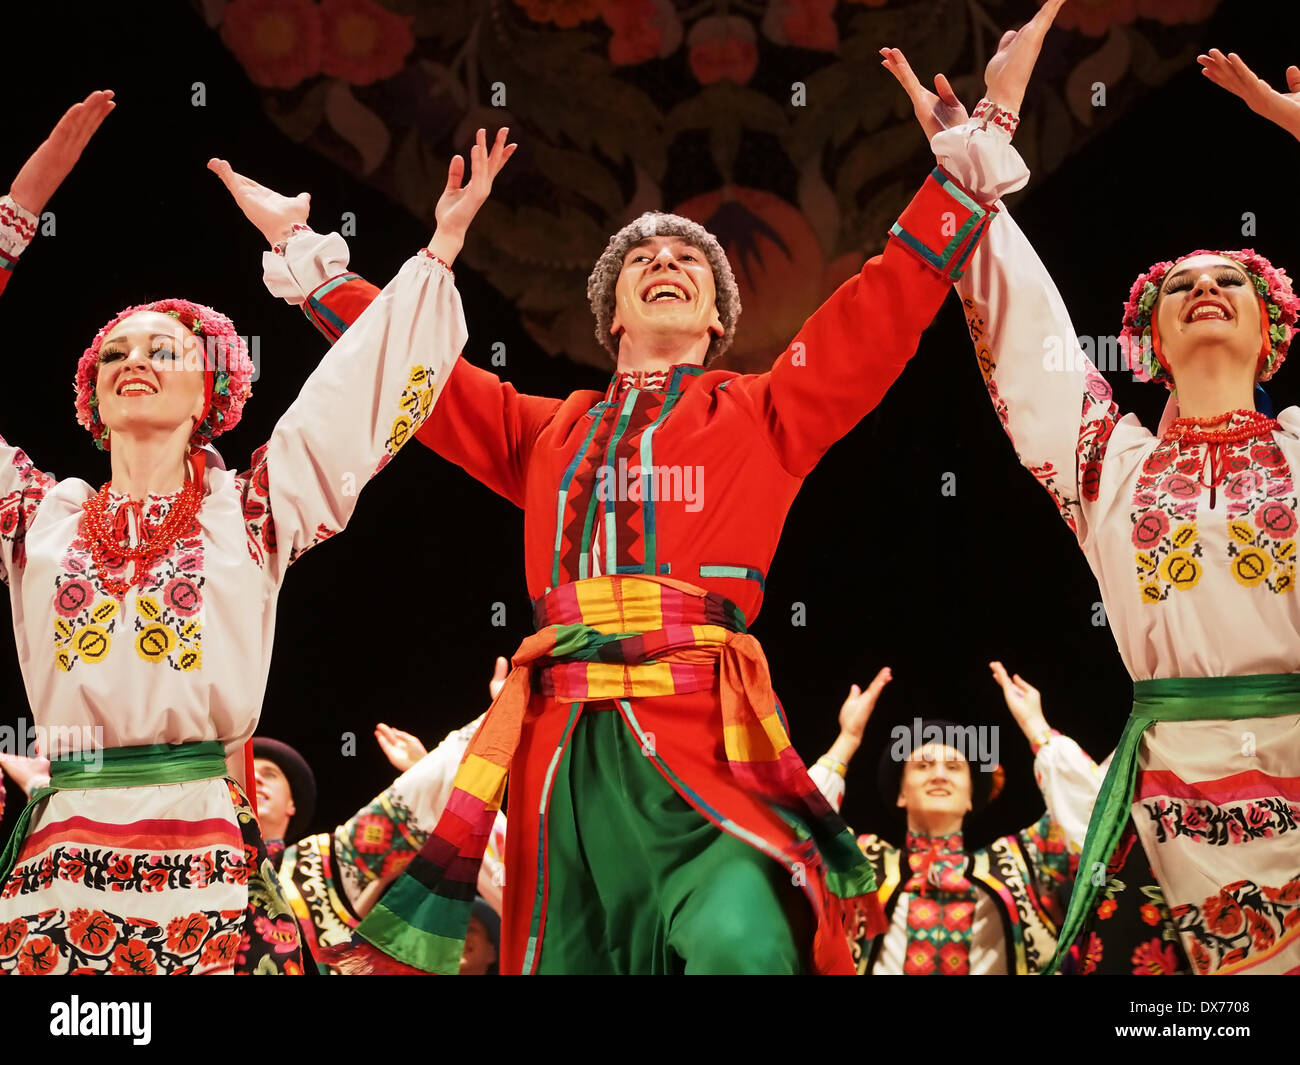 Lugansk, Ukraine. 18th January 2014. The Ukrainian National Folk Dance Ensemble named After P. Virsky, who is considered the best folkloric ballet dancer in the country, performed a live show on stage in Lugansk Credit:  Igor Golovnov/Alamy Live News Stock Photo